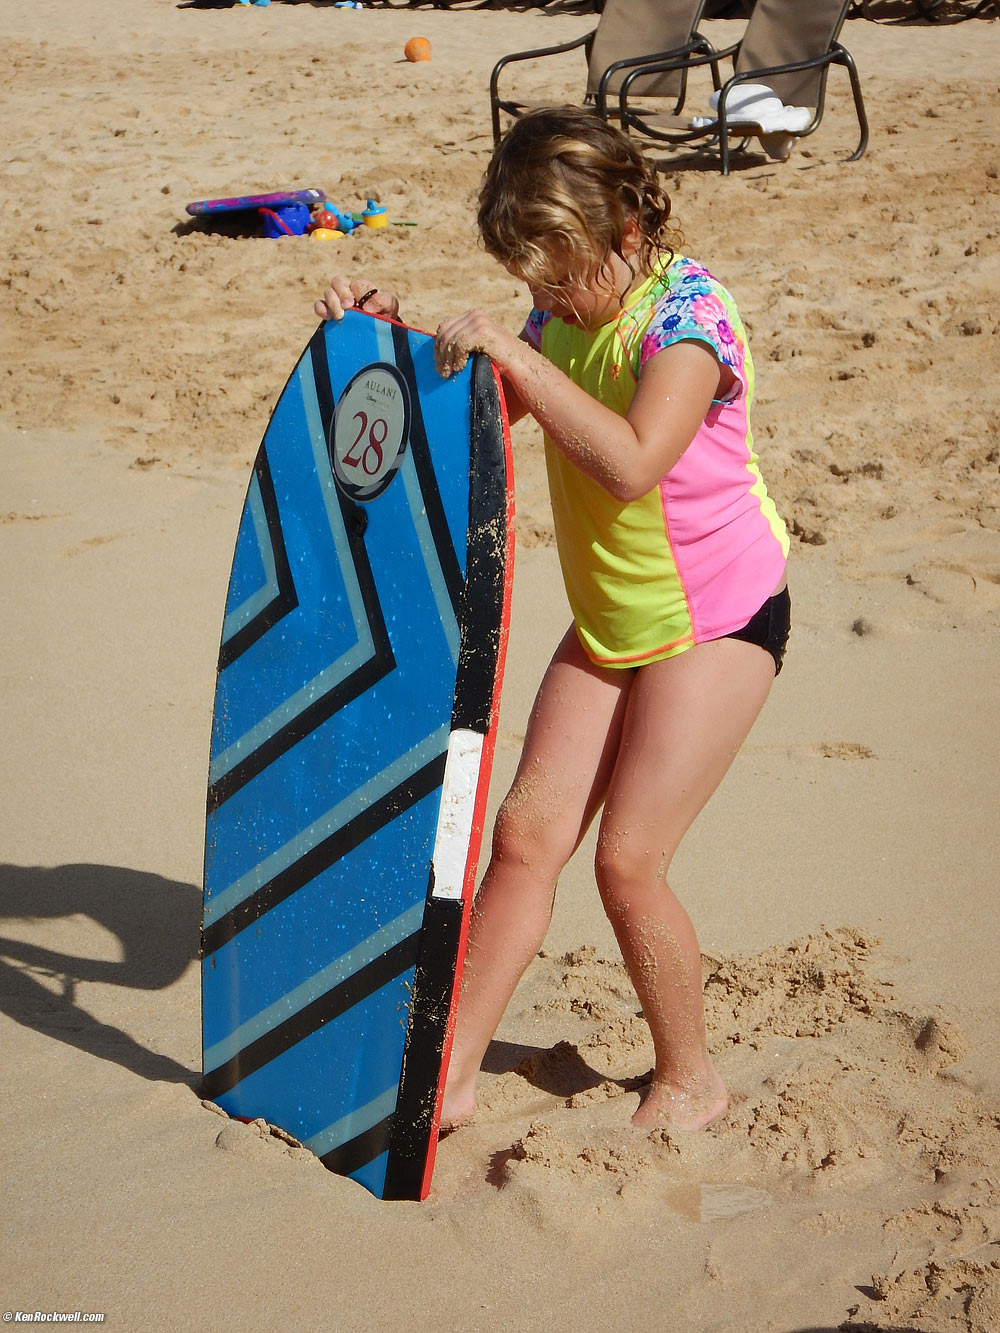 Katie and boogie board